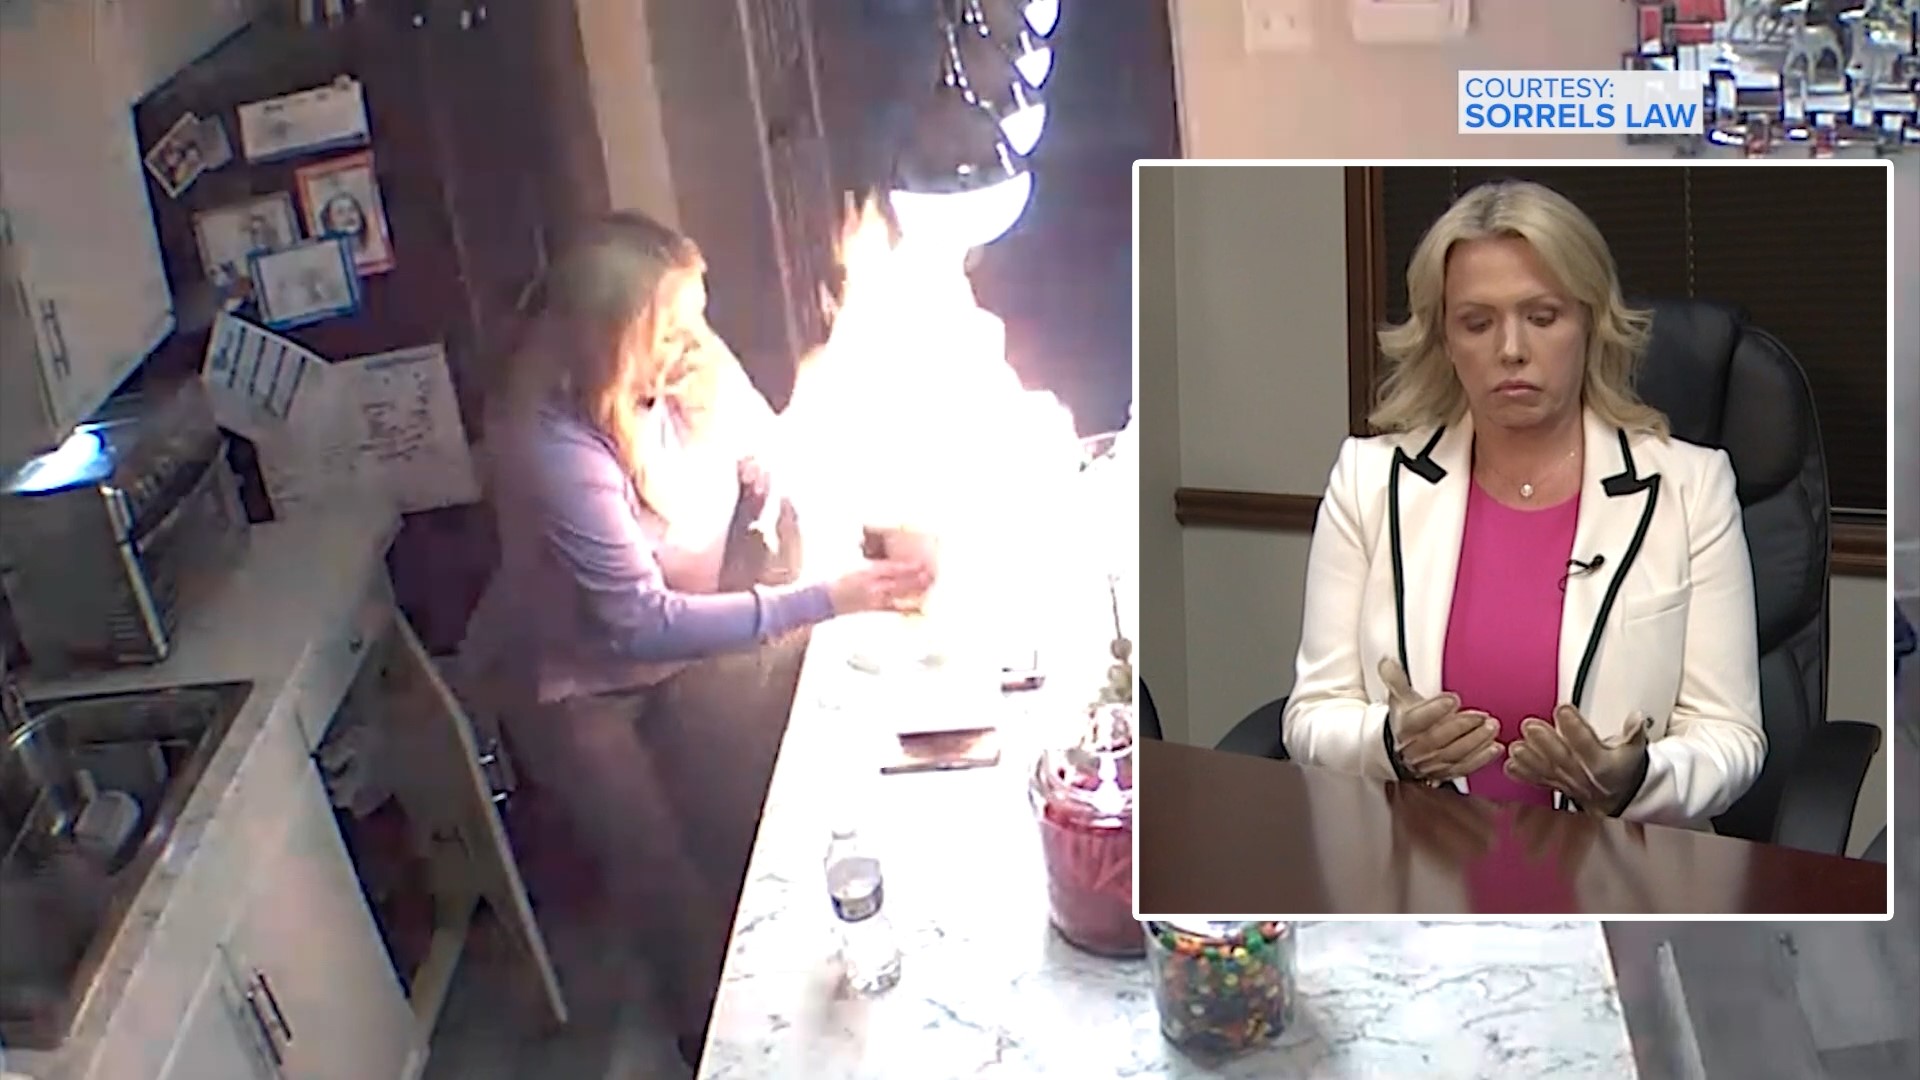 Video shows the woman trying to put out the late flames coming from the candle. When she tried to grab it and move it, the fire spread, causing her severe injuries.